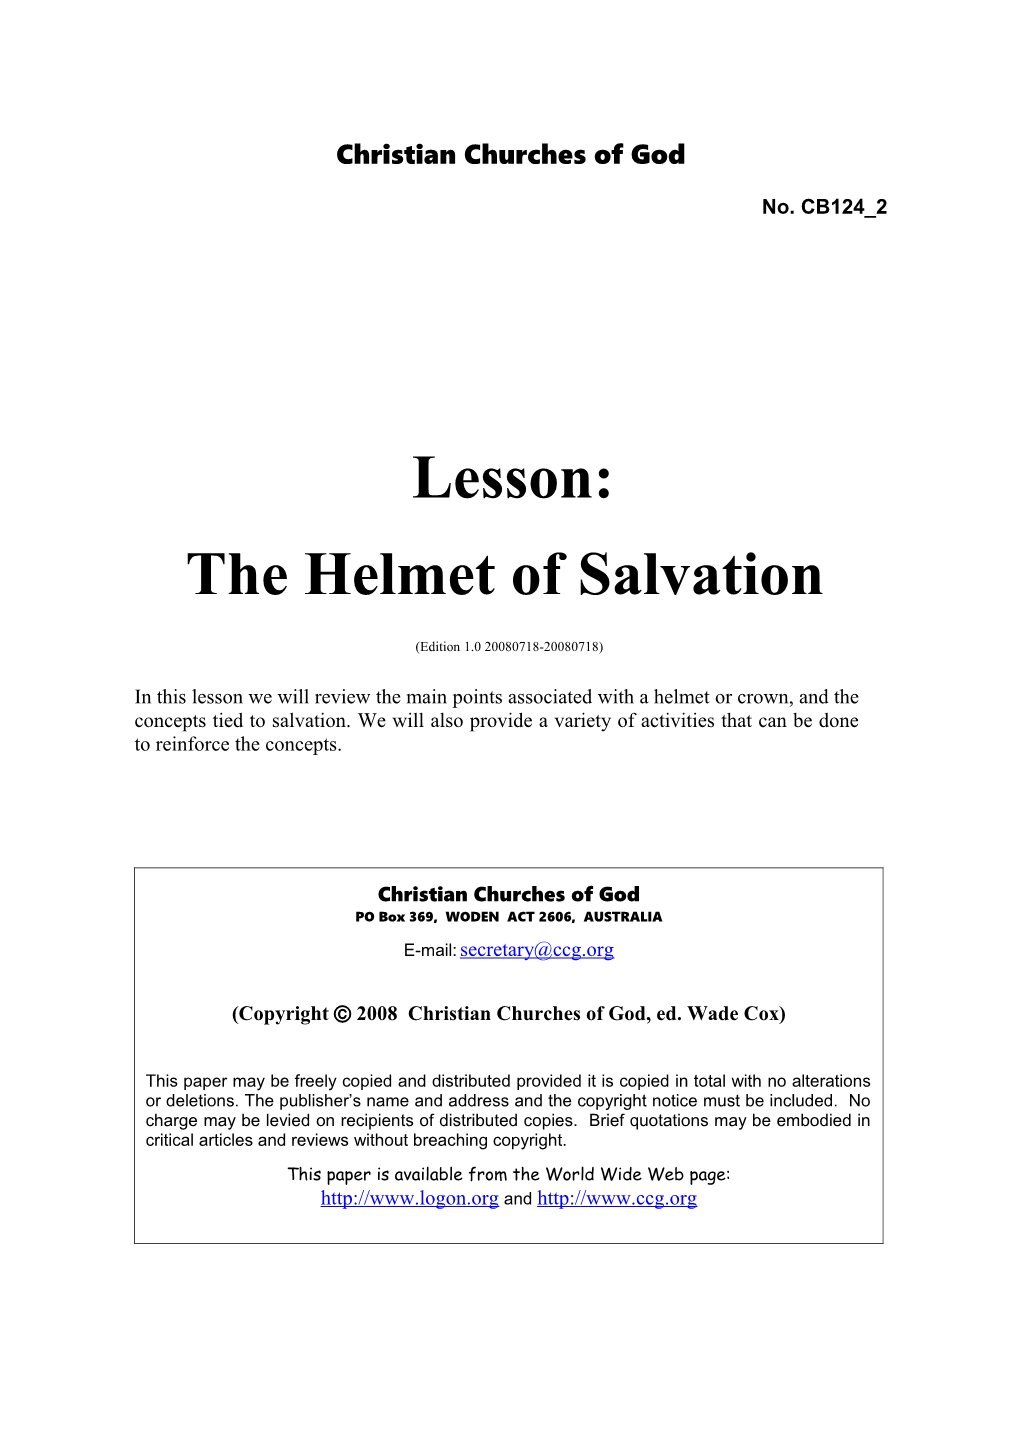 Lesson: the Helmet of Salvation (No. CB124 2)